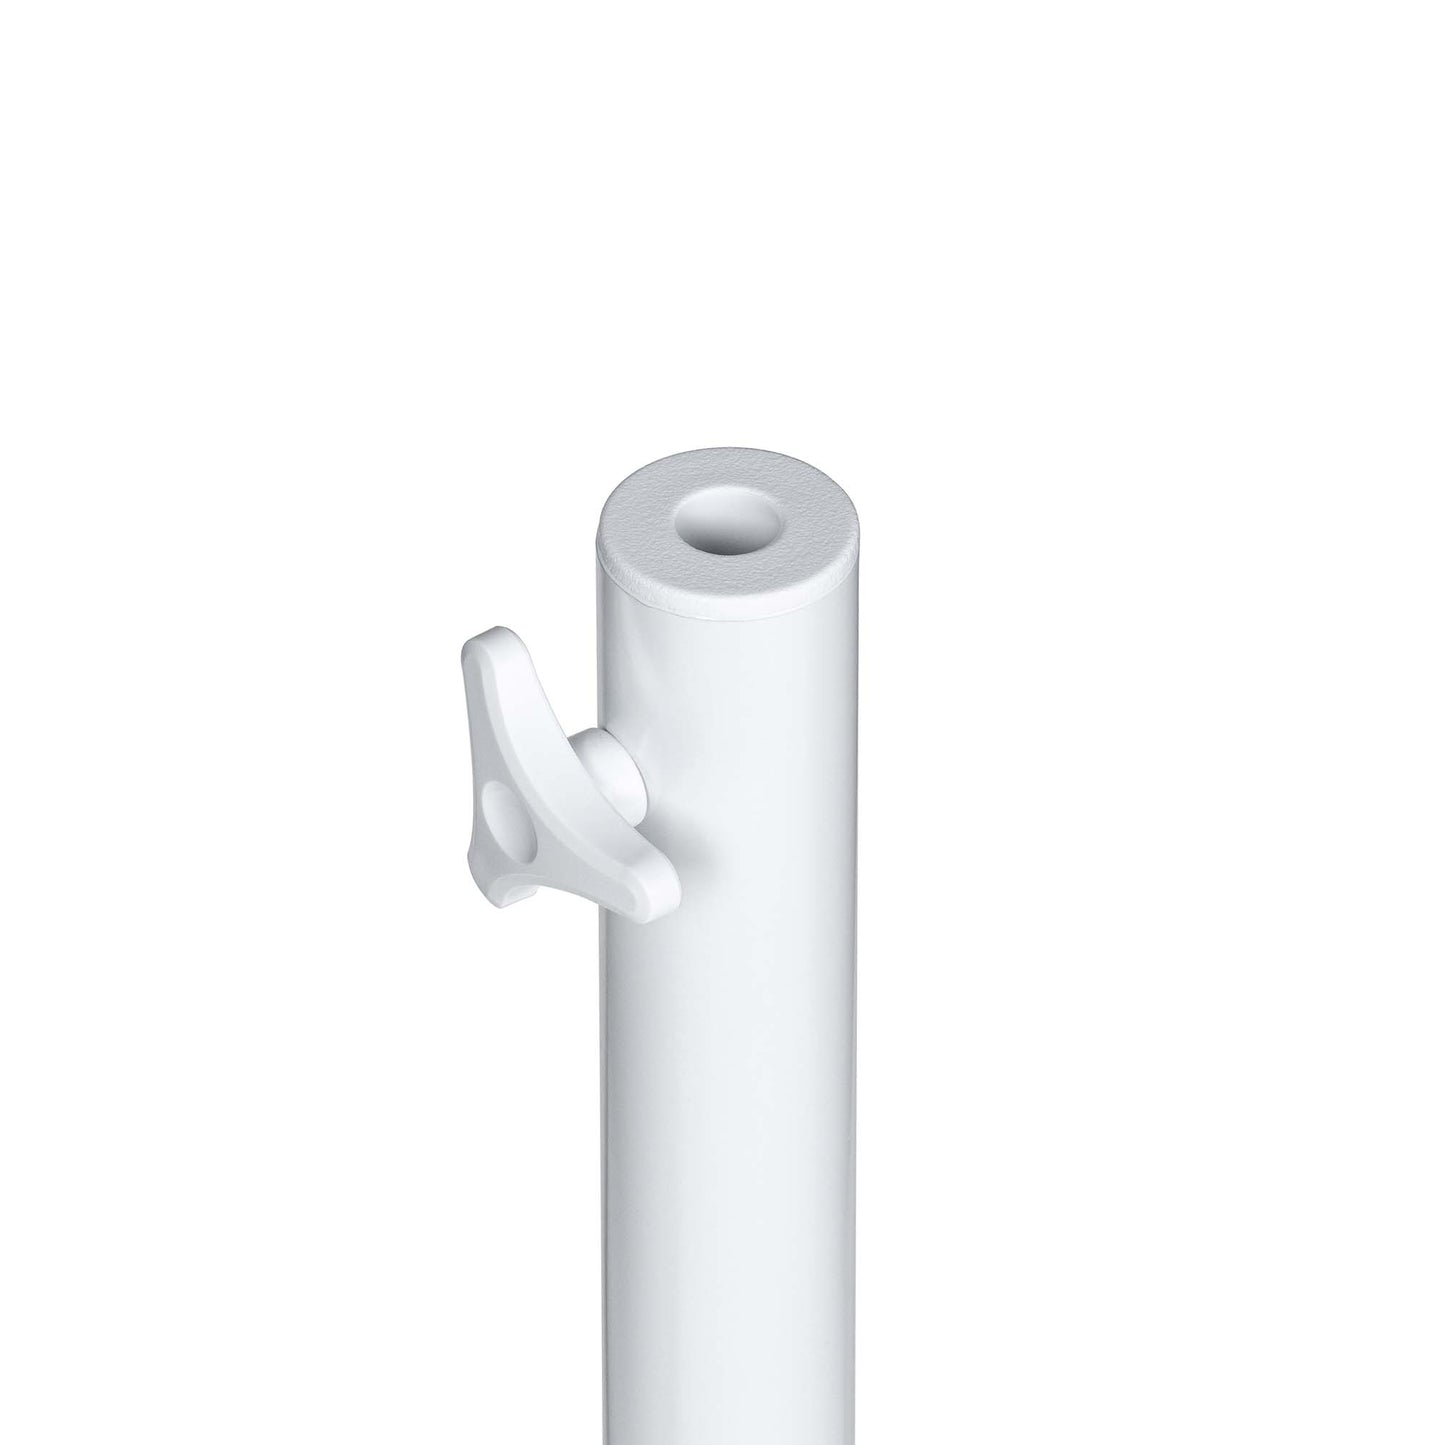 4BLANC floor stand for nail dust collector